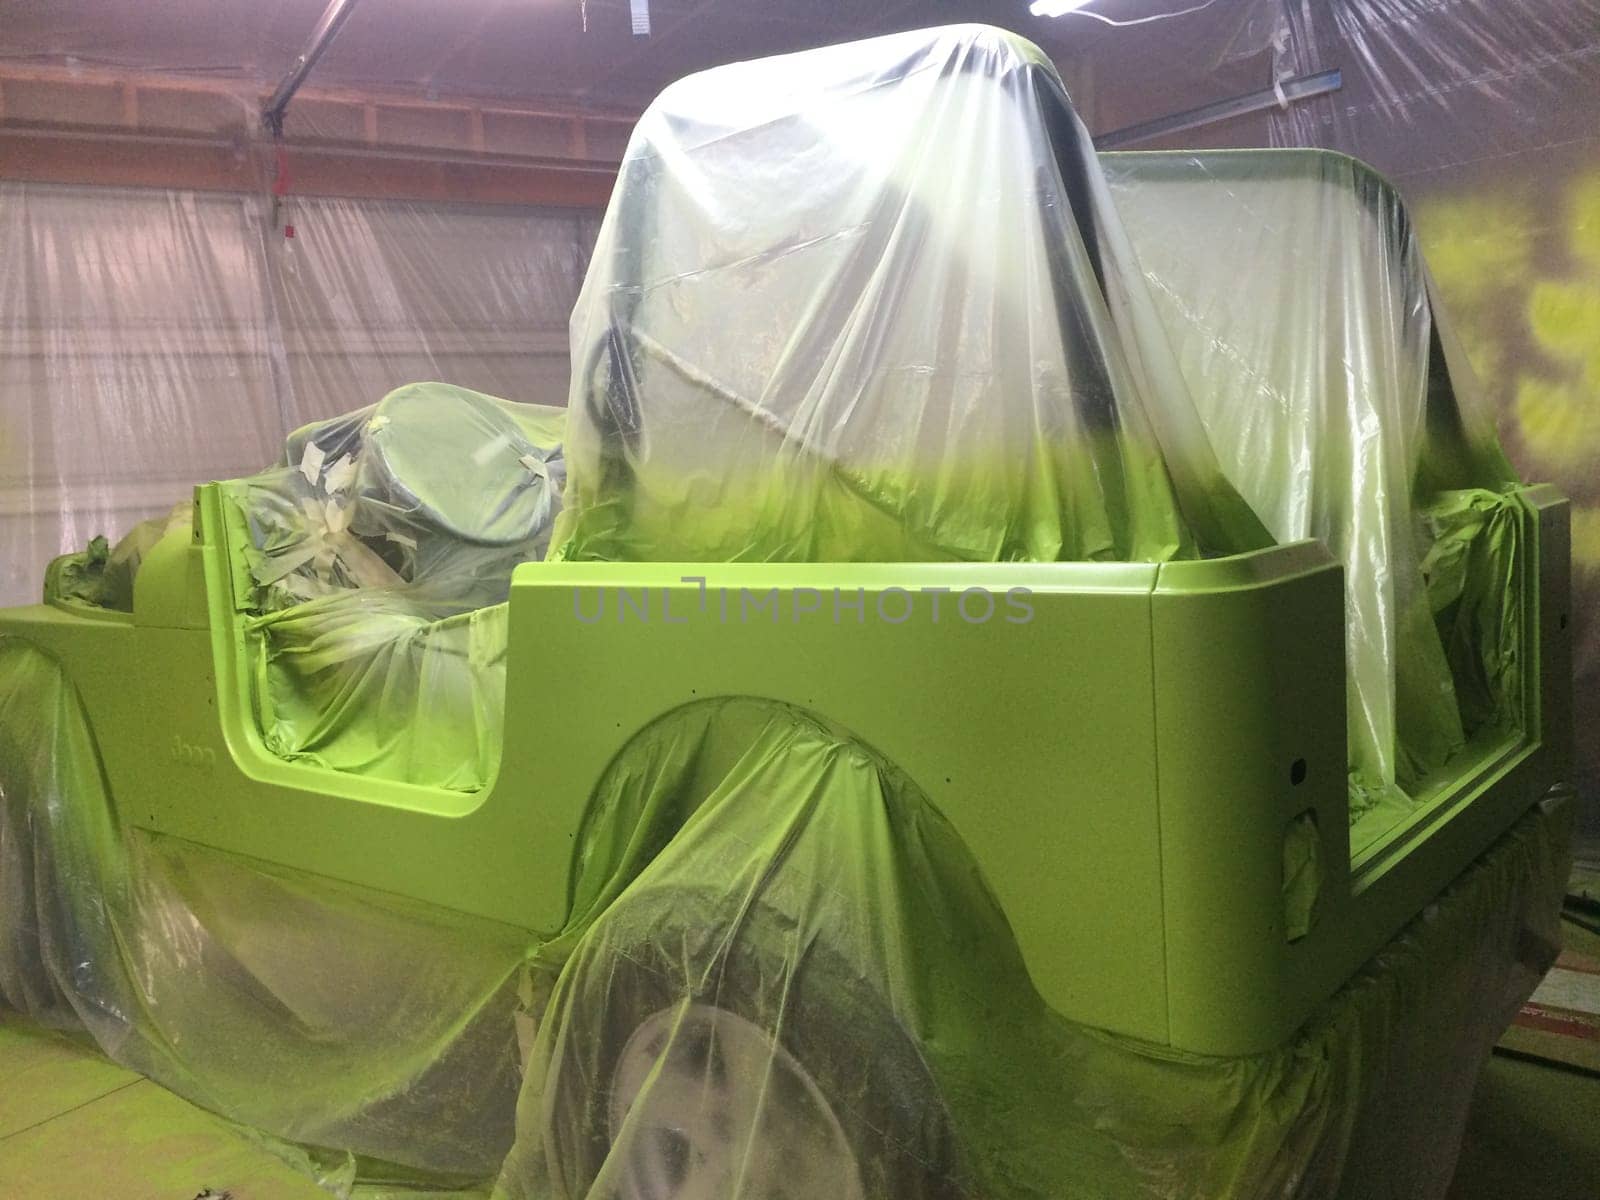 Auto Body Restoration, Lime Green Paint Job, 1990s Vehicle by grumblytumbleweed